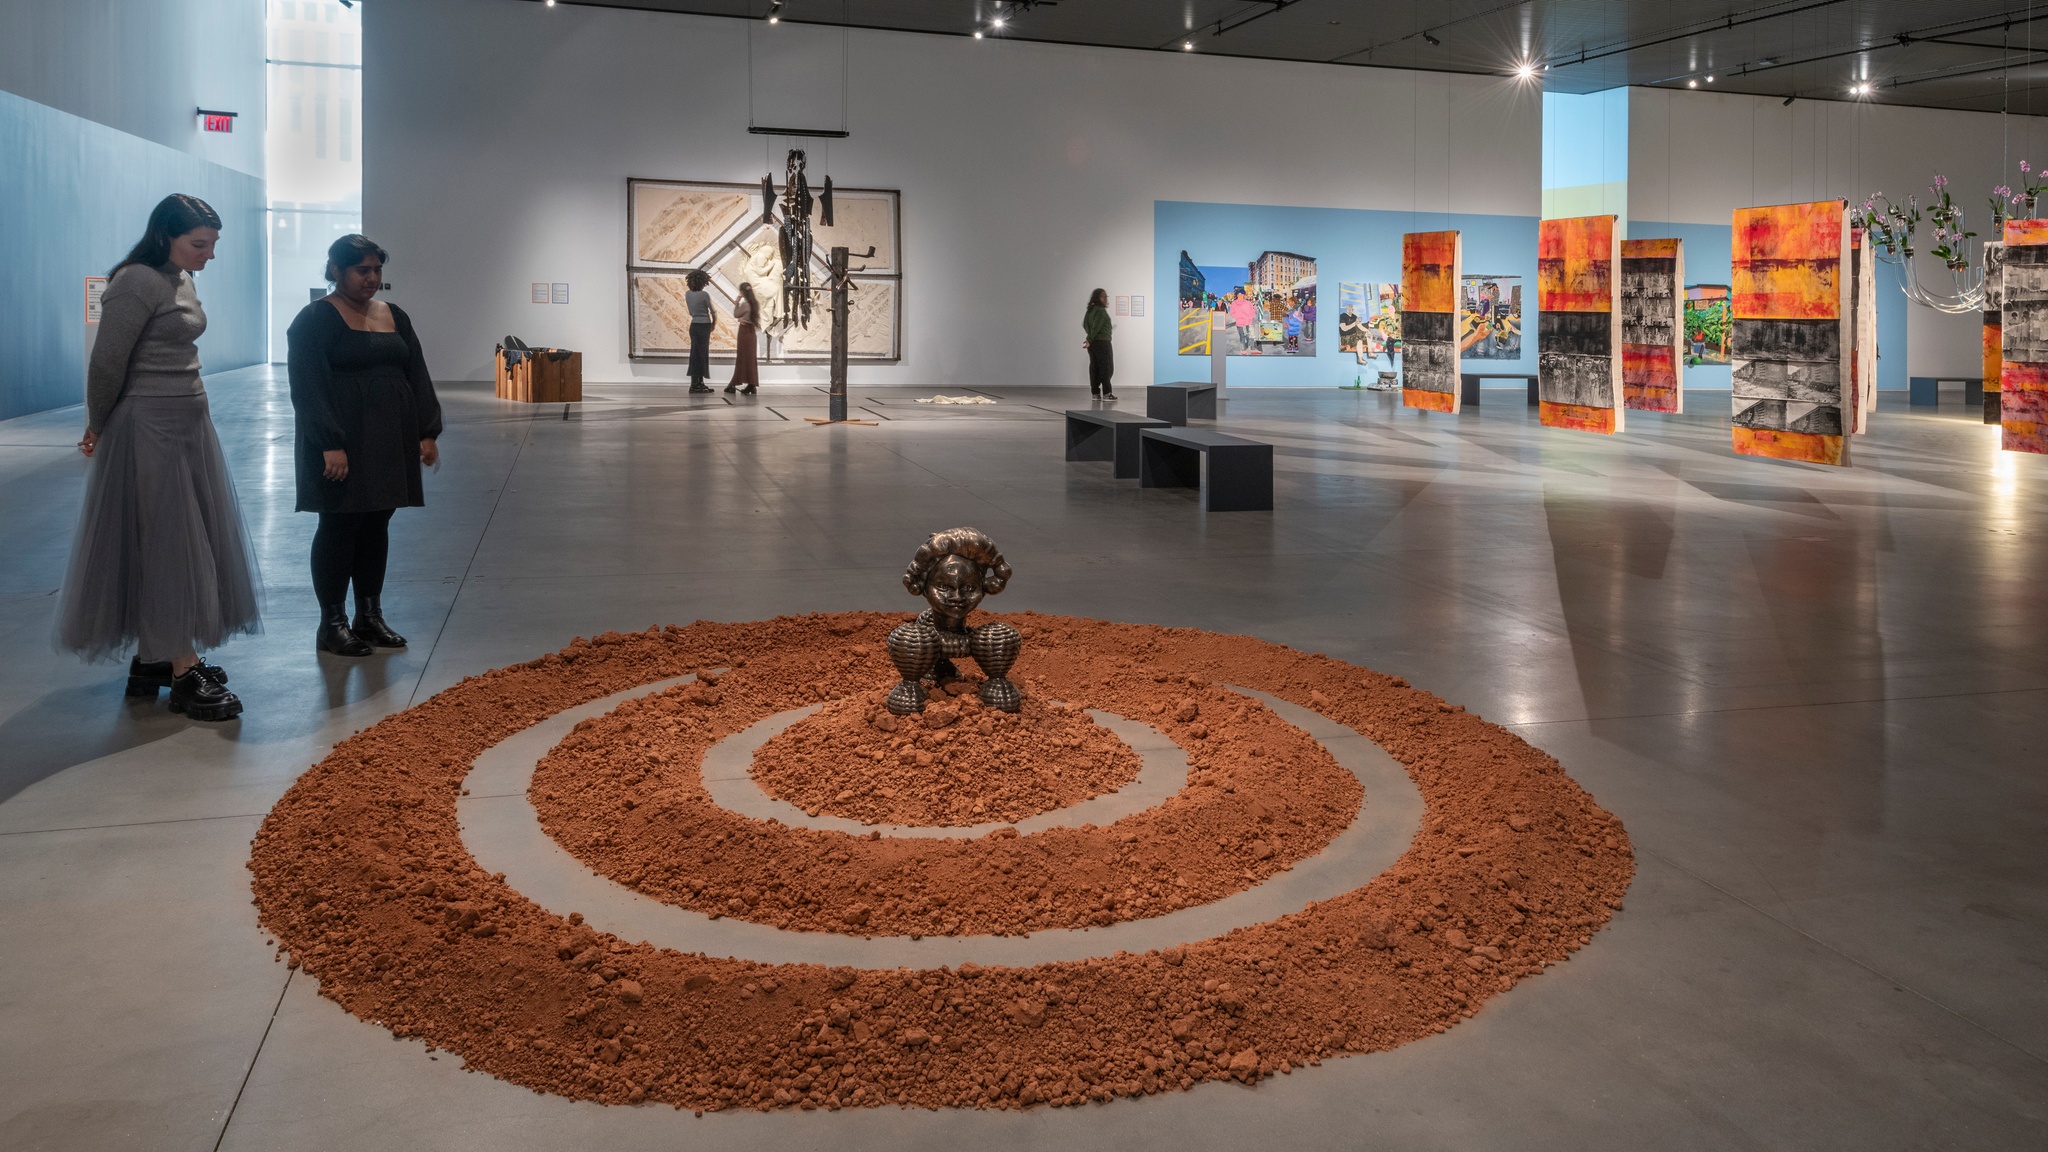 Two gallery visitors stand in an art gallery looking down at a wide artwork on the floor. It consists of three concentric rings of red dirt. At the center sits a bronze sculpture inspired by the Benin Bronzes, historical artworks from Benin, present-day Nigeria. In the background are other paintings and installations.